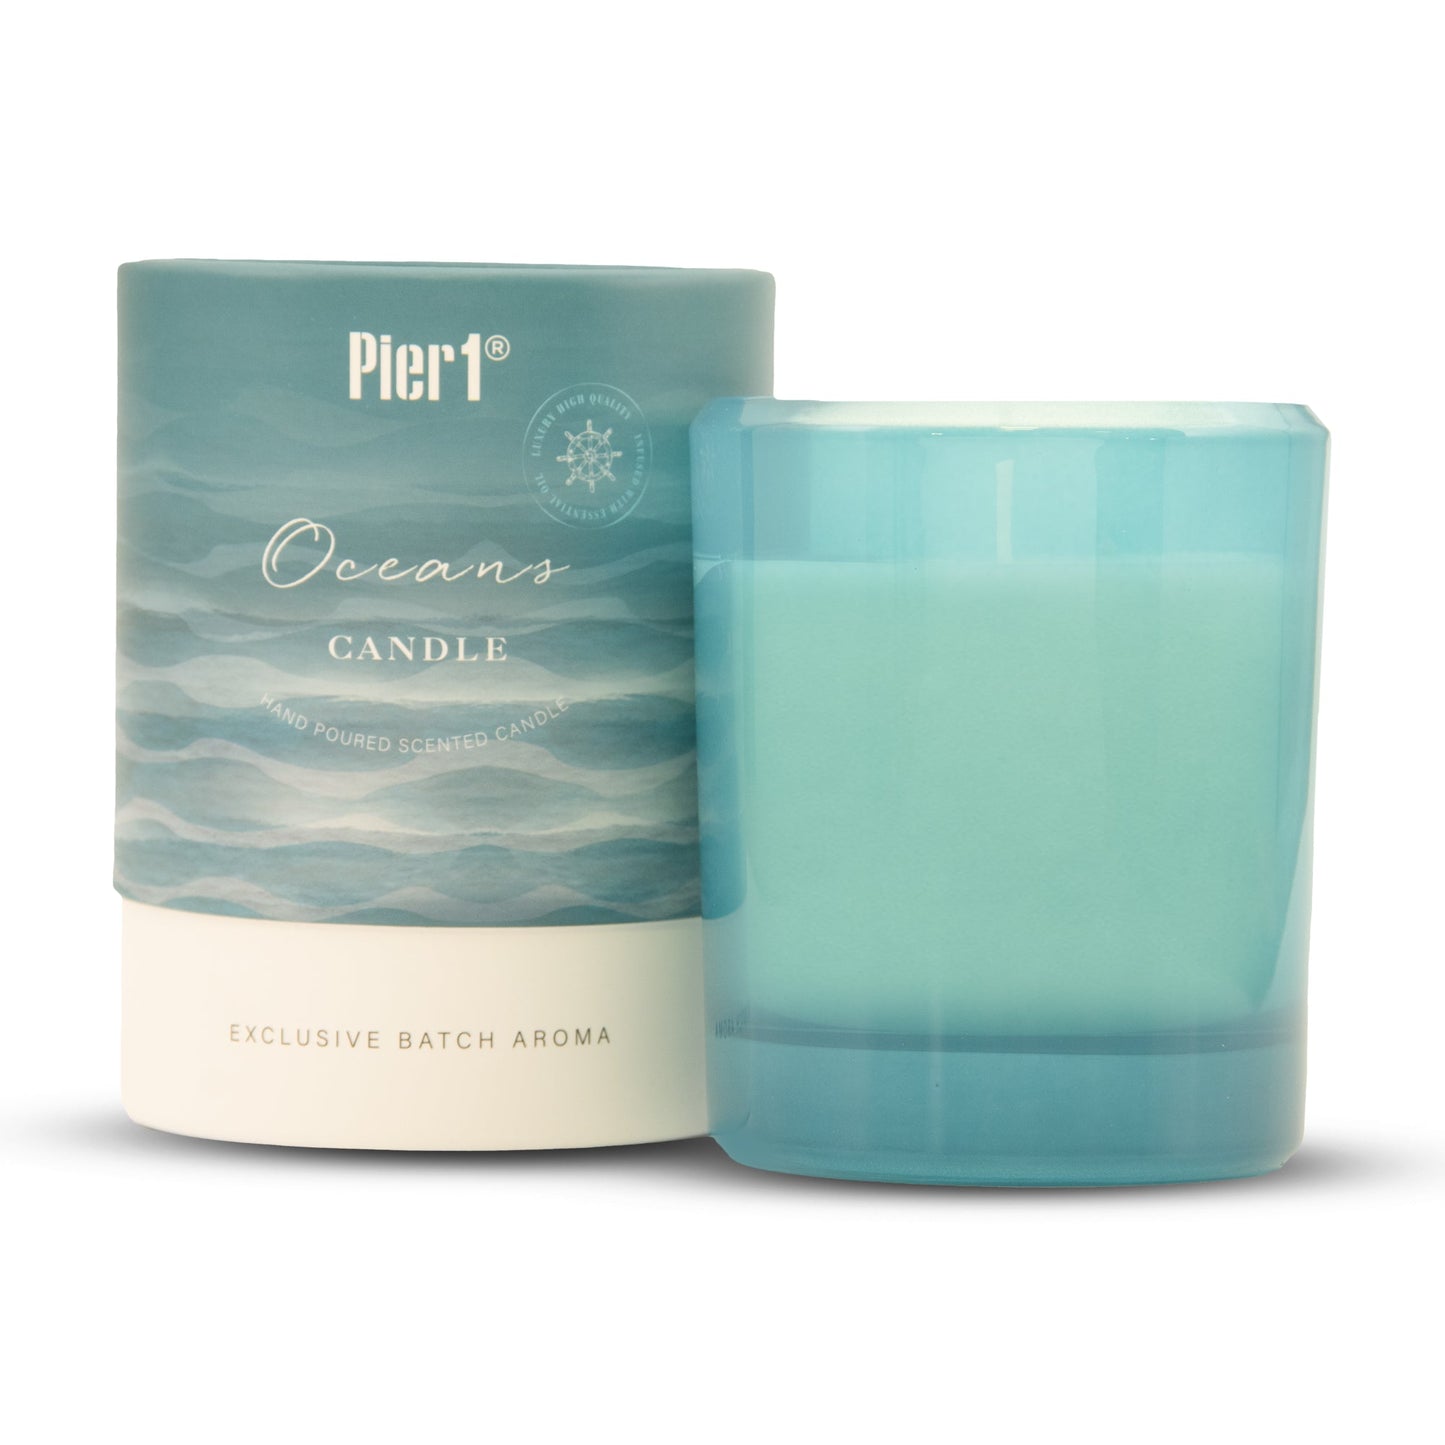 Pier 1 Oceans Boxed Soy Candle 8oz